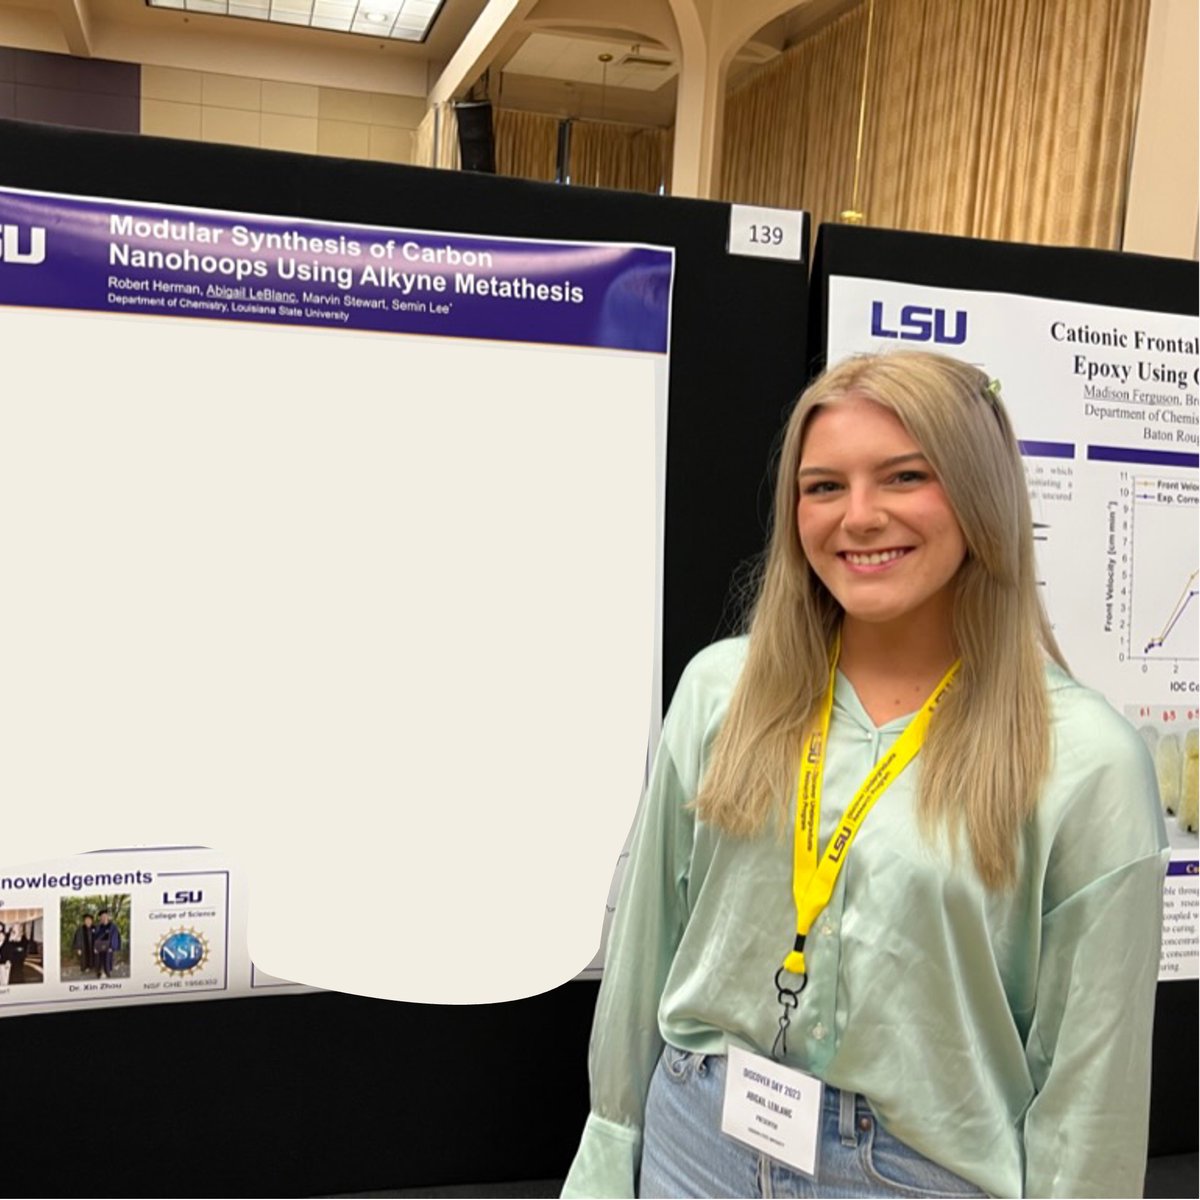 Our talented undergrad researchers Sarah @SarahNa14677138 and Abigail presented their research at LSU Discover Day 2023! @LSUDiscover